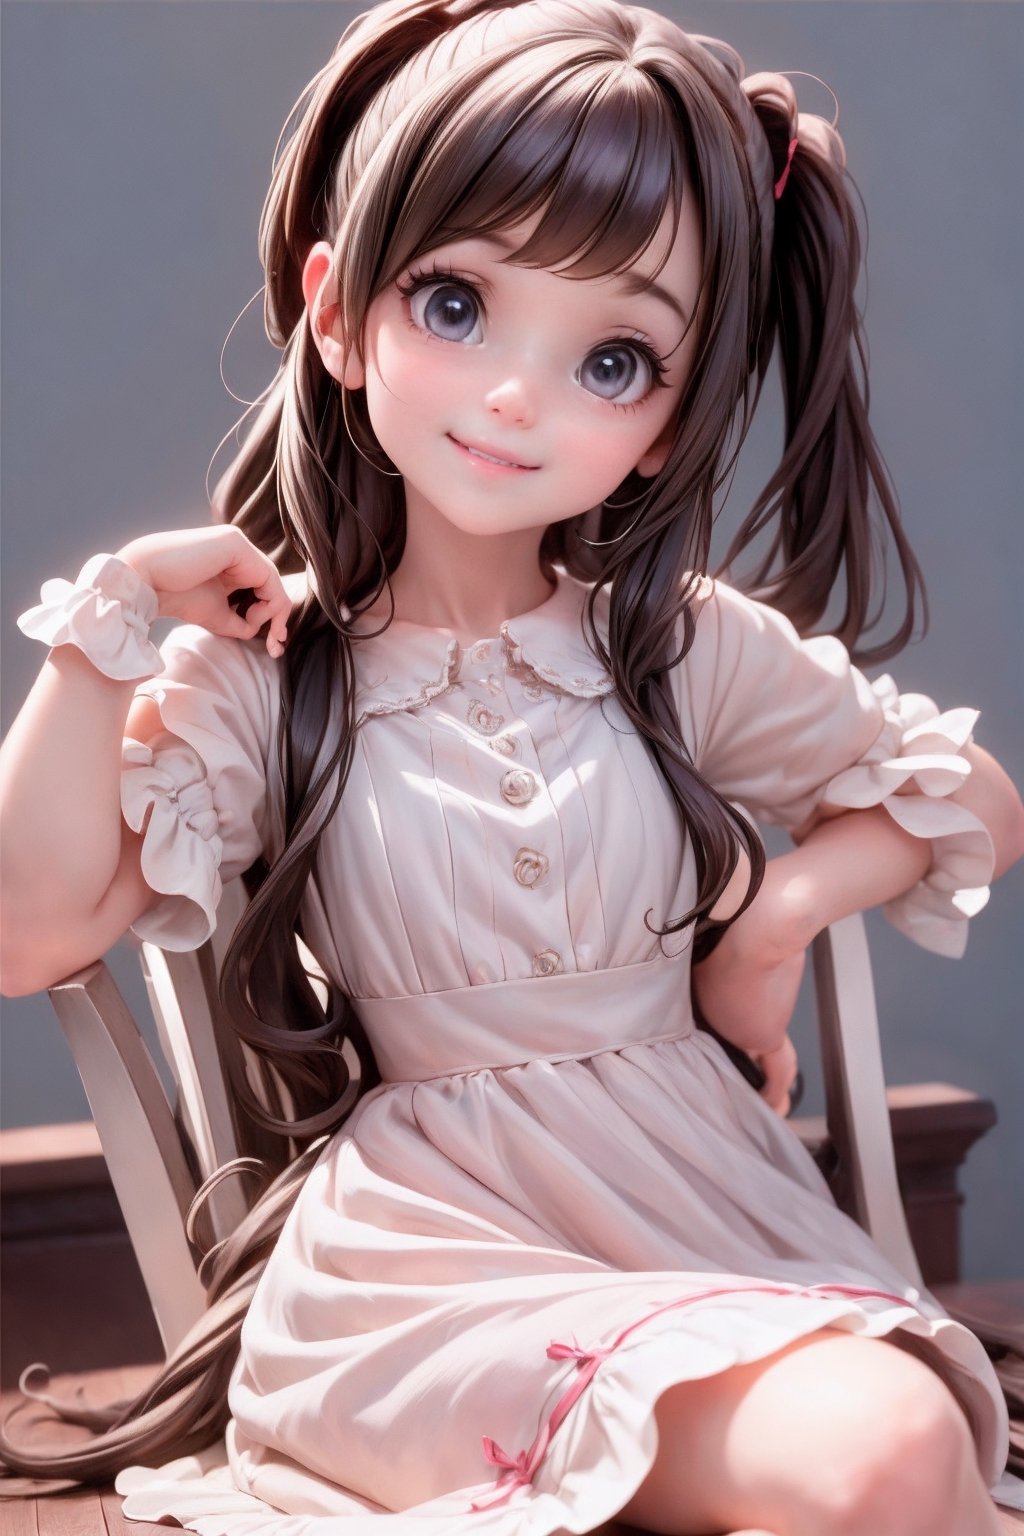 masterpiece, best quality, detailed face, sharp focus, a young girl smiling, loli dress, elegant pose, slouching, sfw,